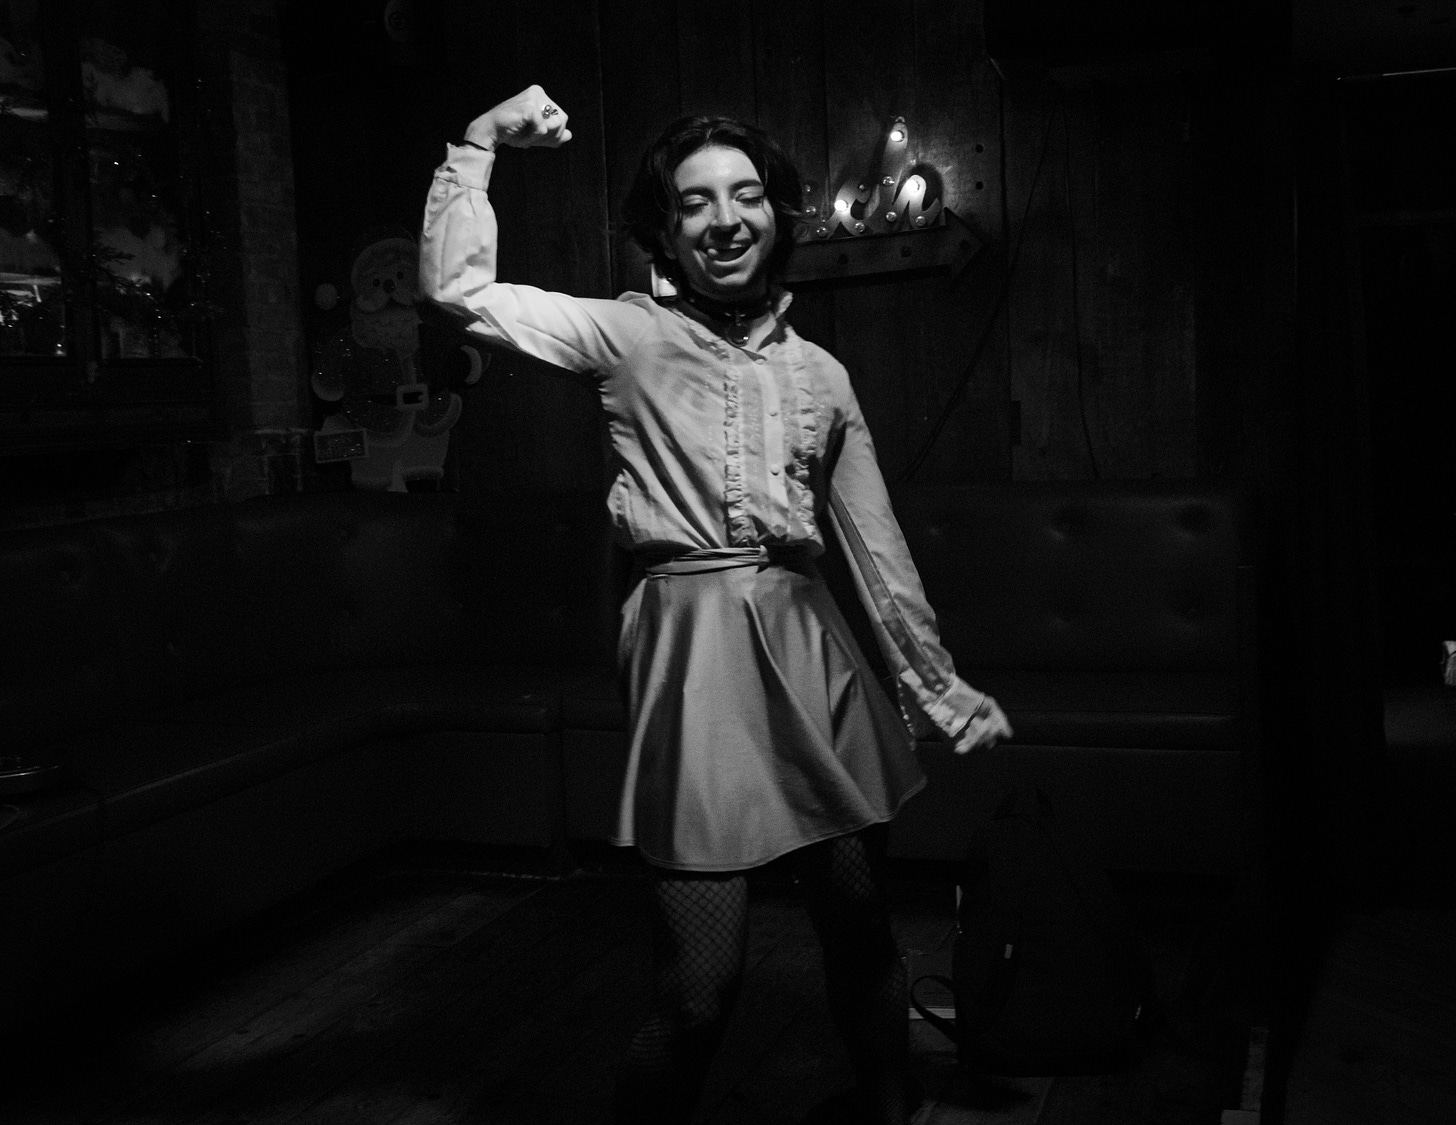 b&w photo of drag performer Peach Bellini smiling and holding up arm to flex bicep muscle